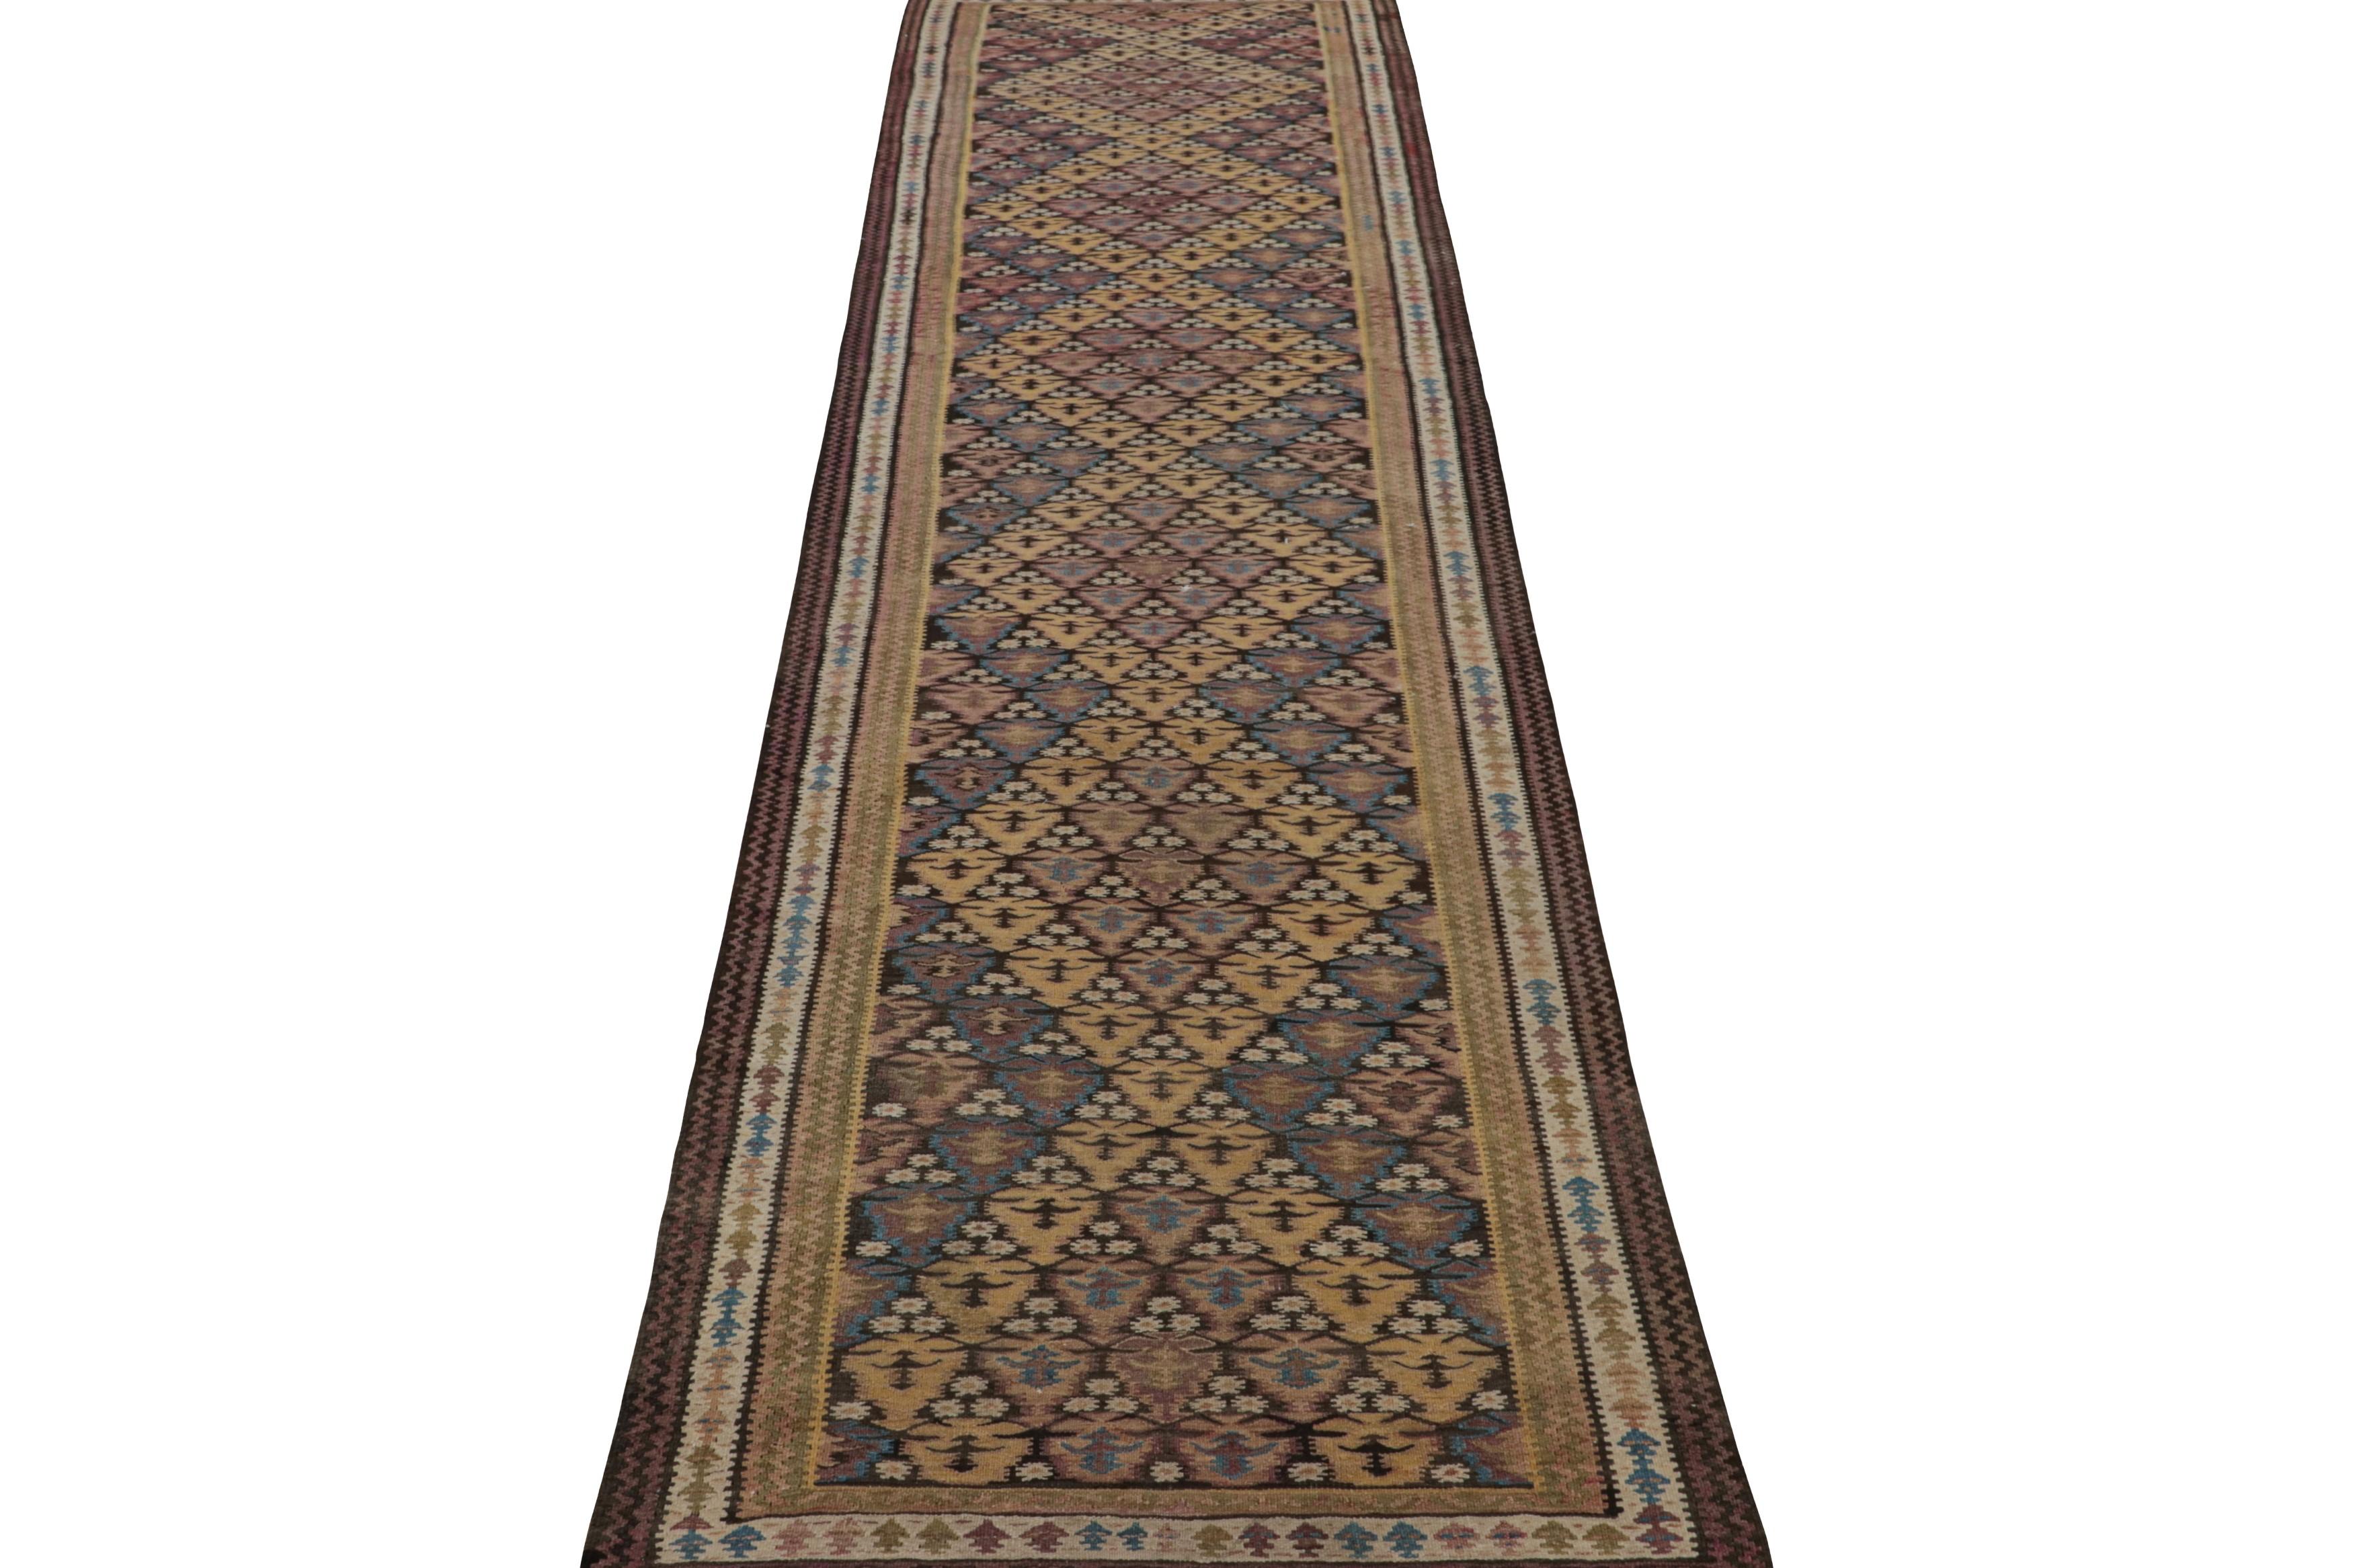 Hand-Woven Vintage Persian Tribal Kilim and Extra-long Runner Rug, from Rug & Kilim For Sale